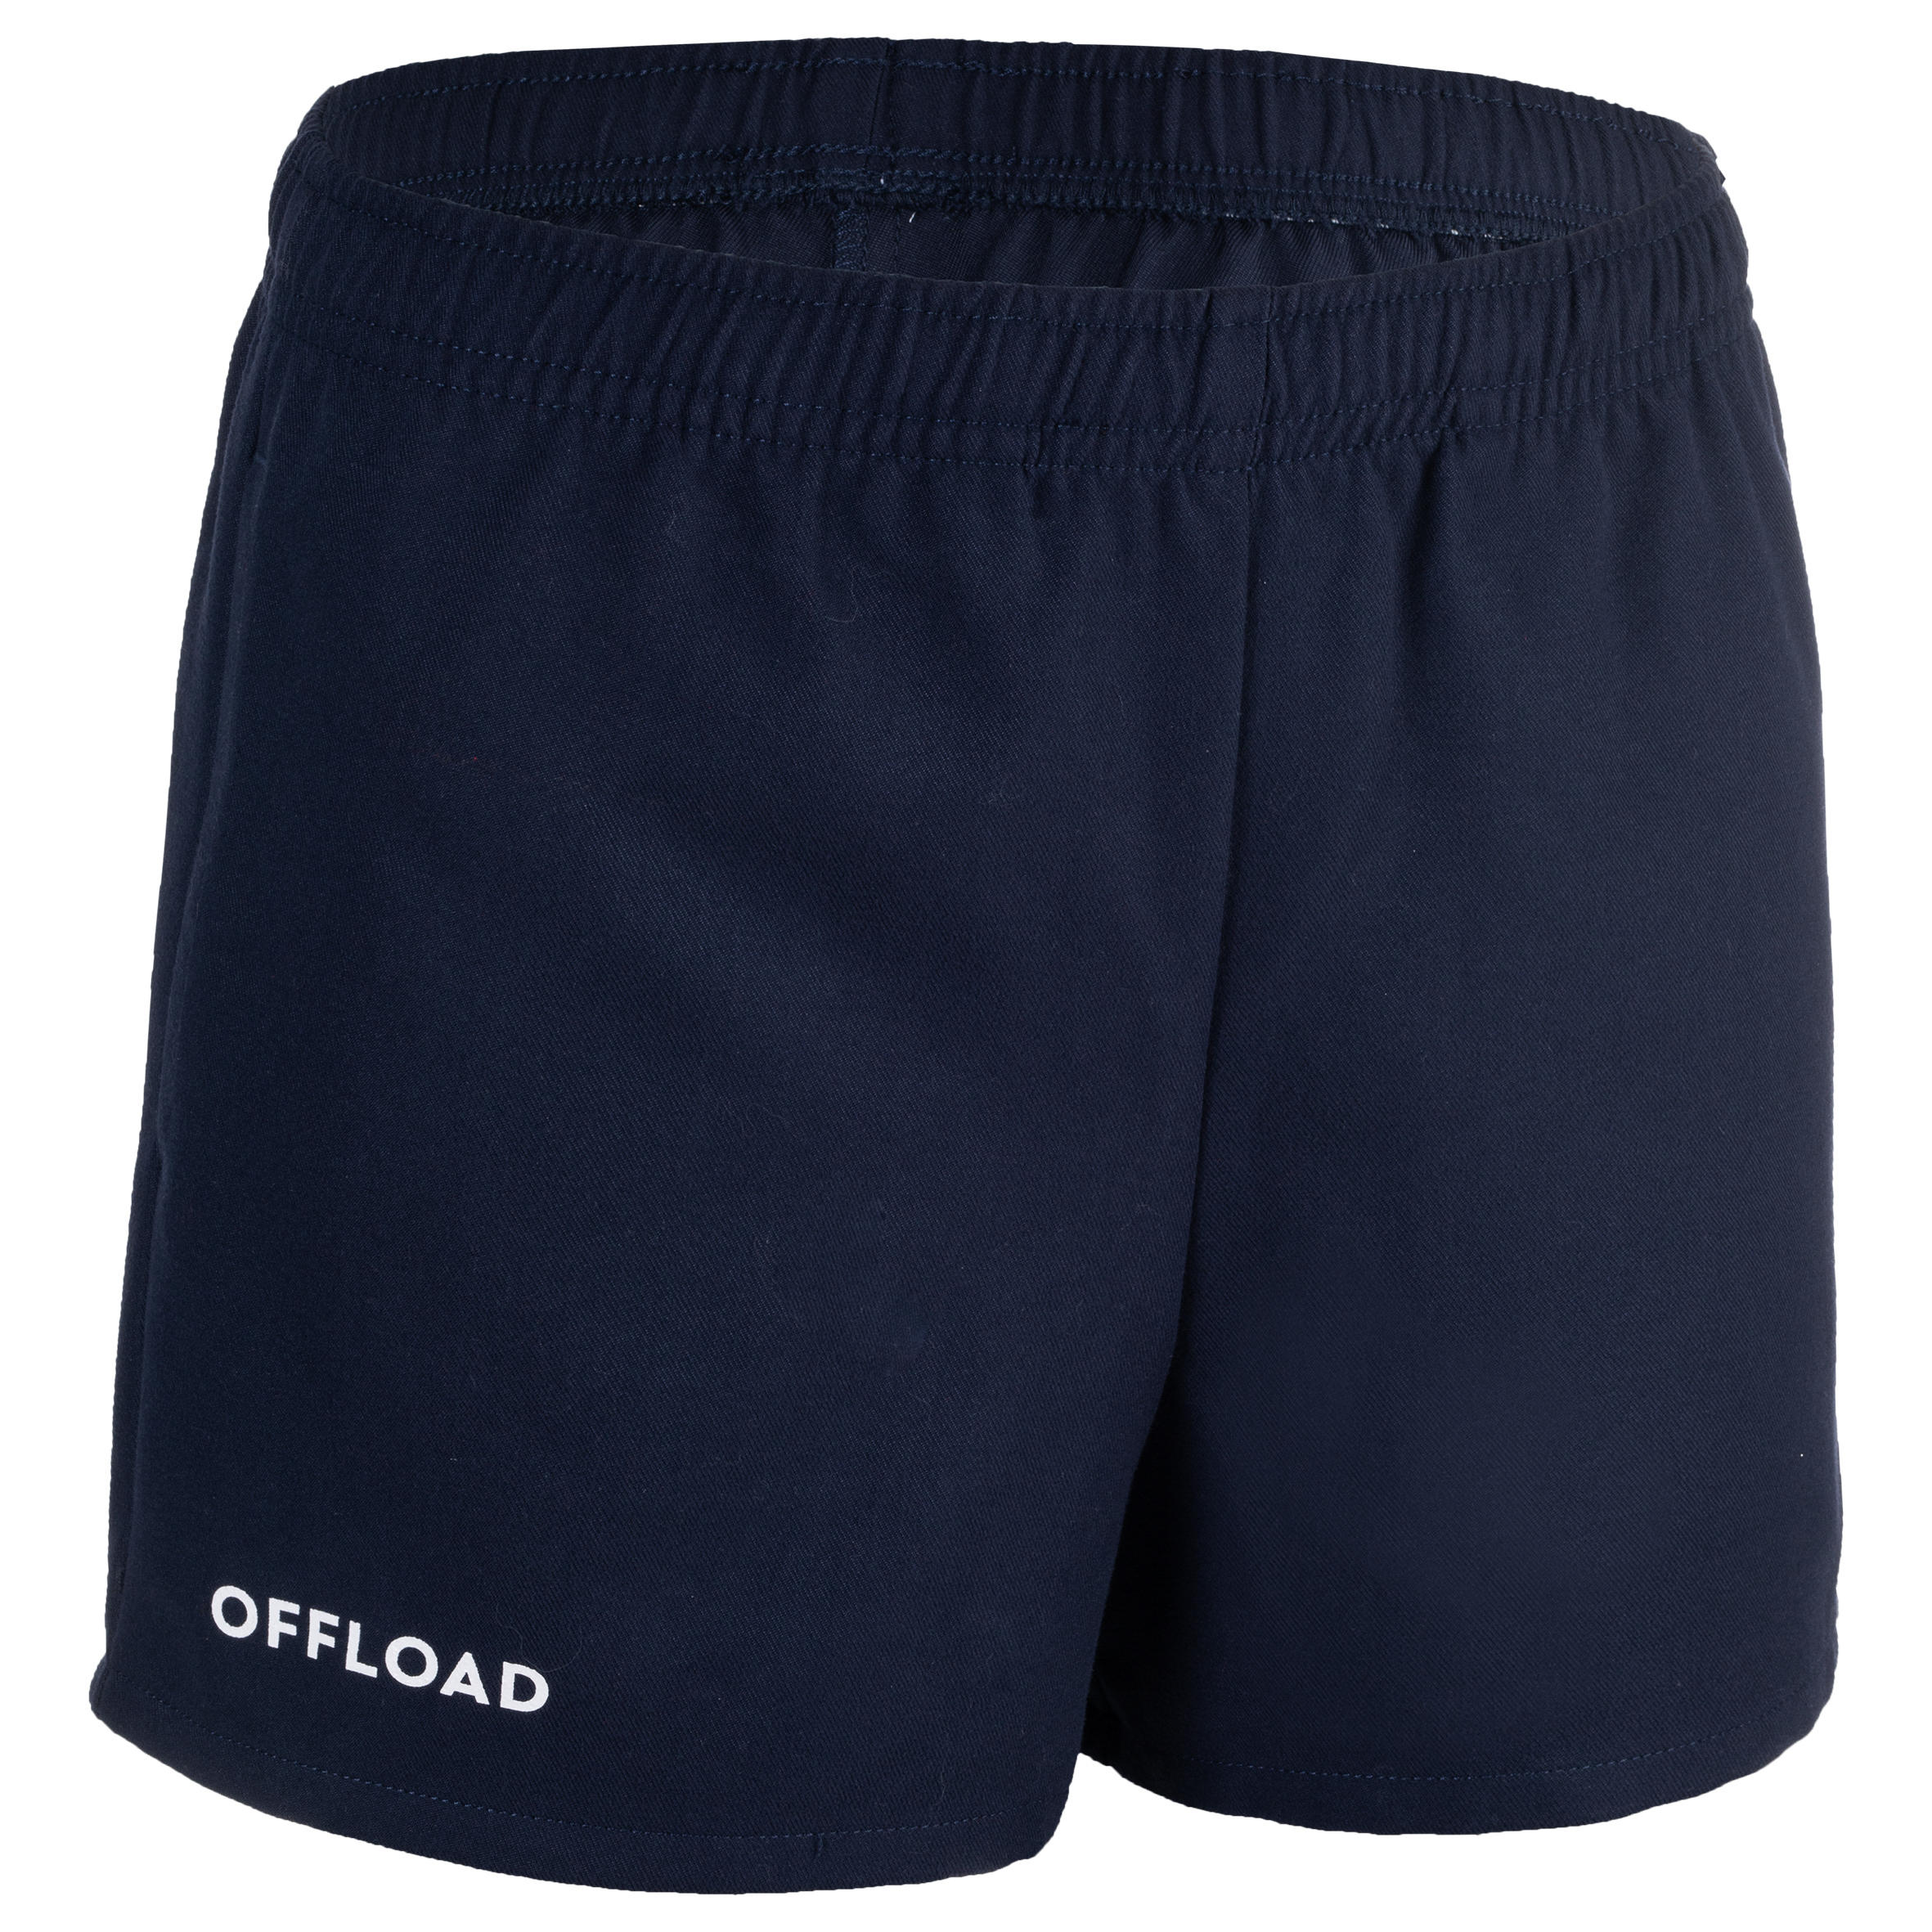 OFFLOAD Kids' Rugby Shorts with Pockets R100 - Blue